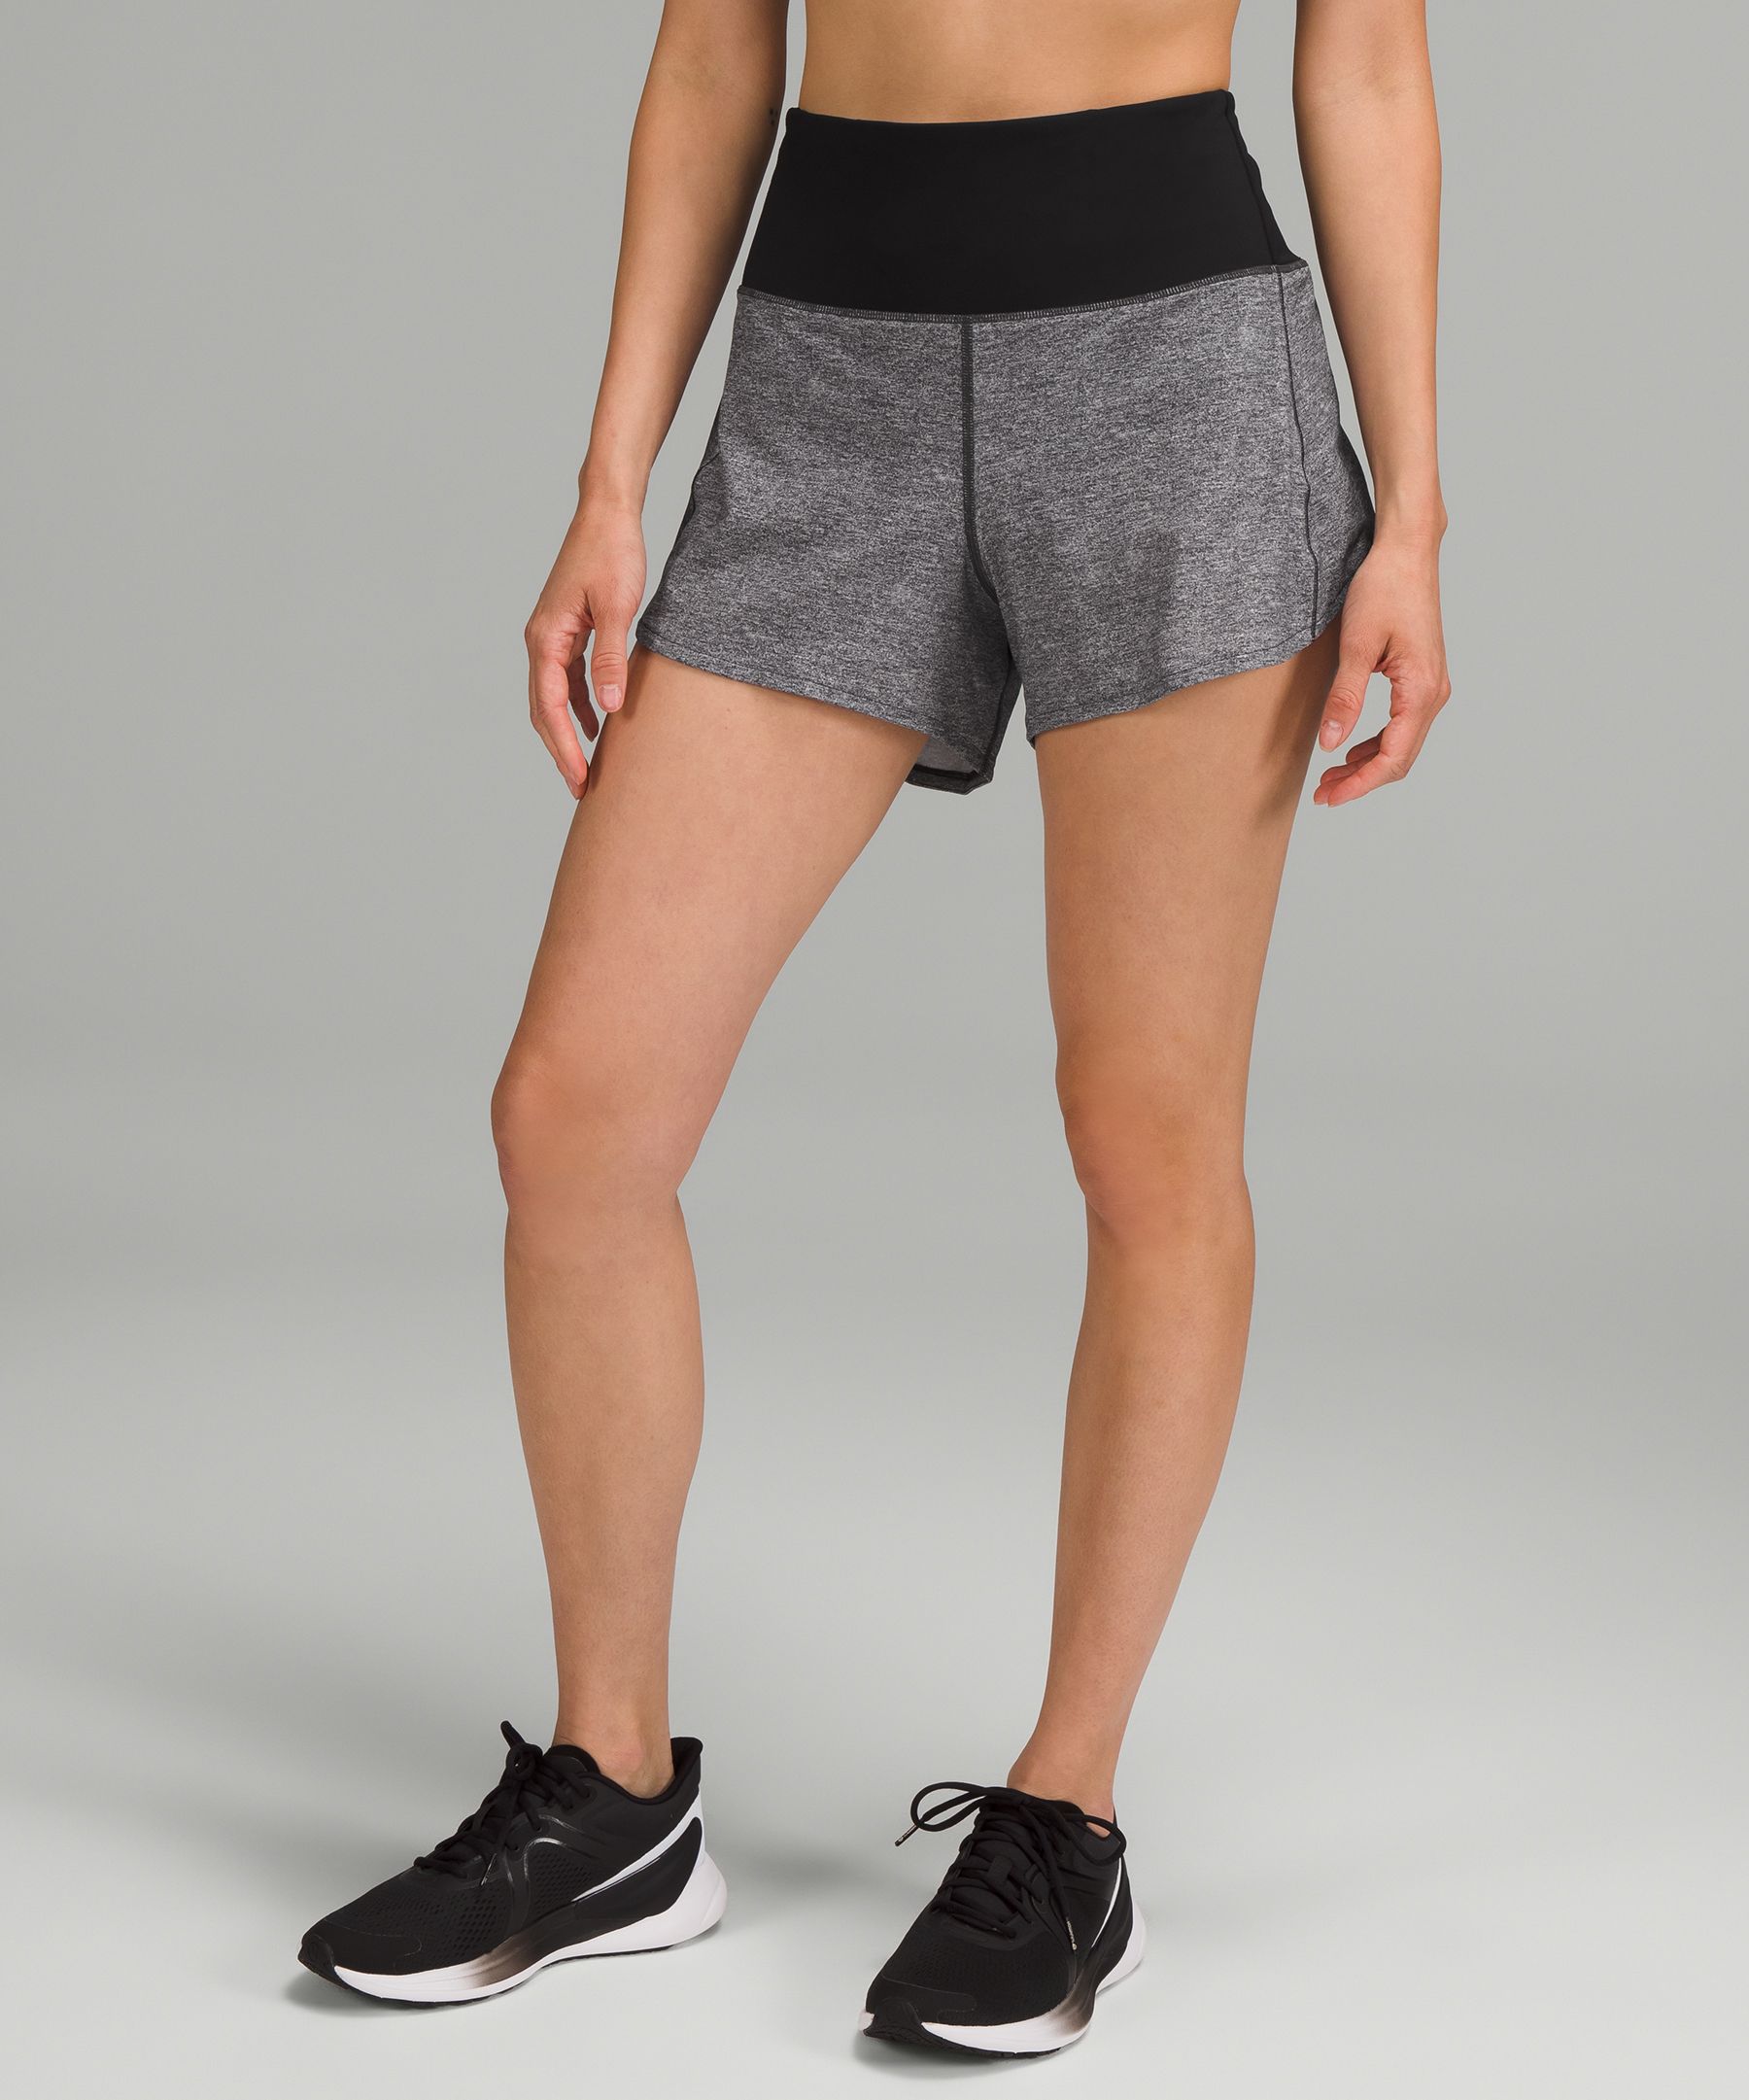 Lululemon Speed Up High-rise Lined Shorts 4" In Heather Lux Black/black